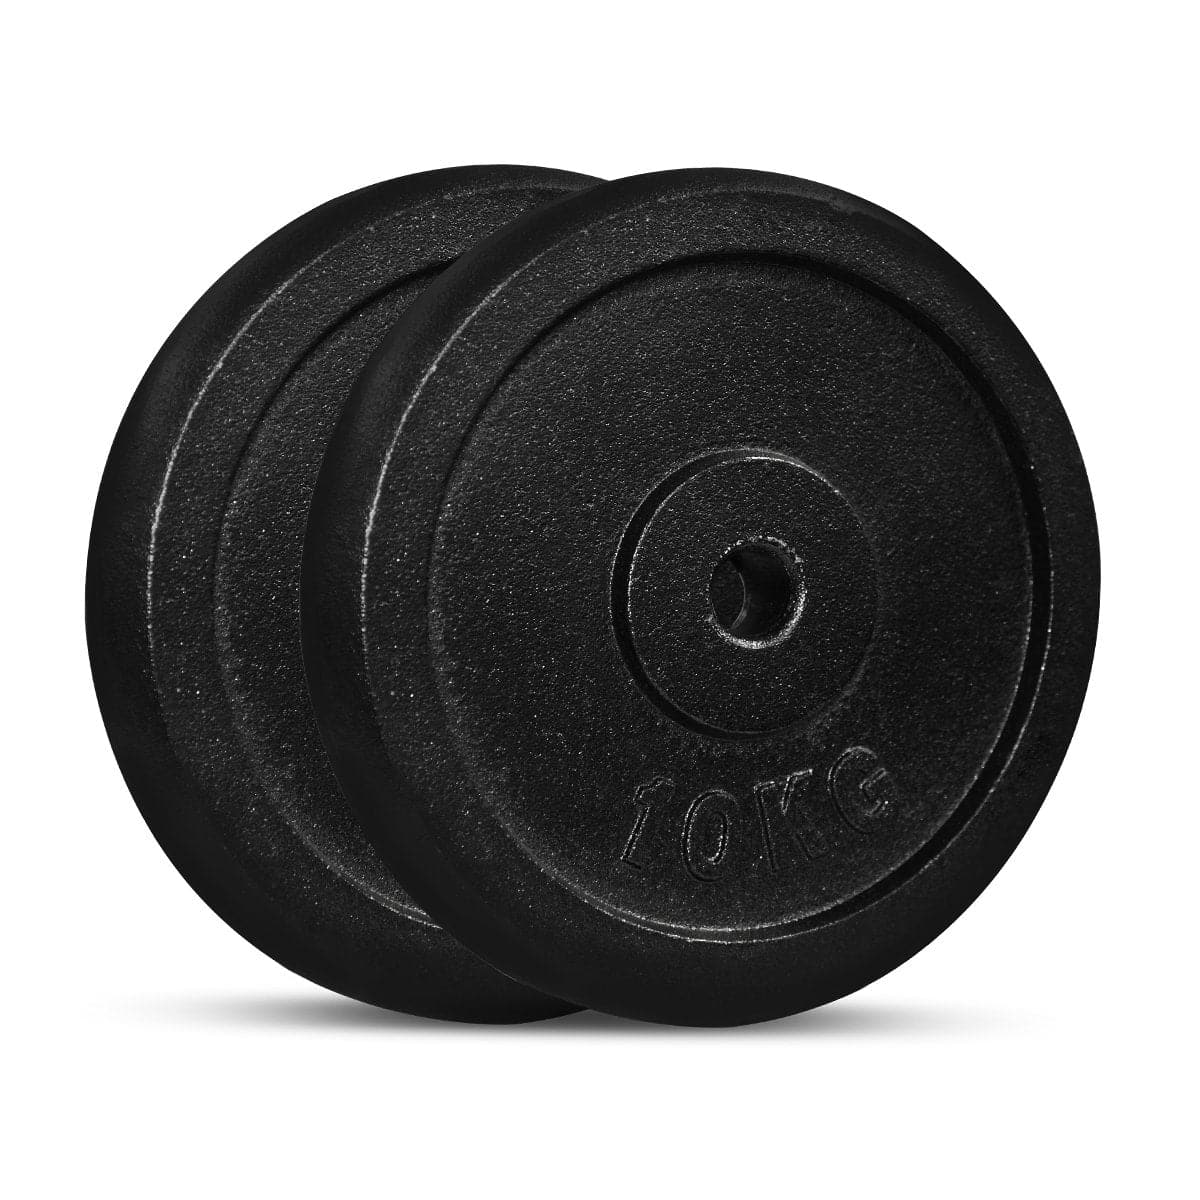 Black Cast Iron Weight Plates (for 25MM bars), Sold in pairs, $4/kg starting from: Musclemania Fitness MegaStore